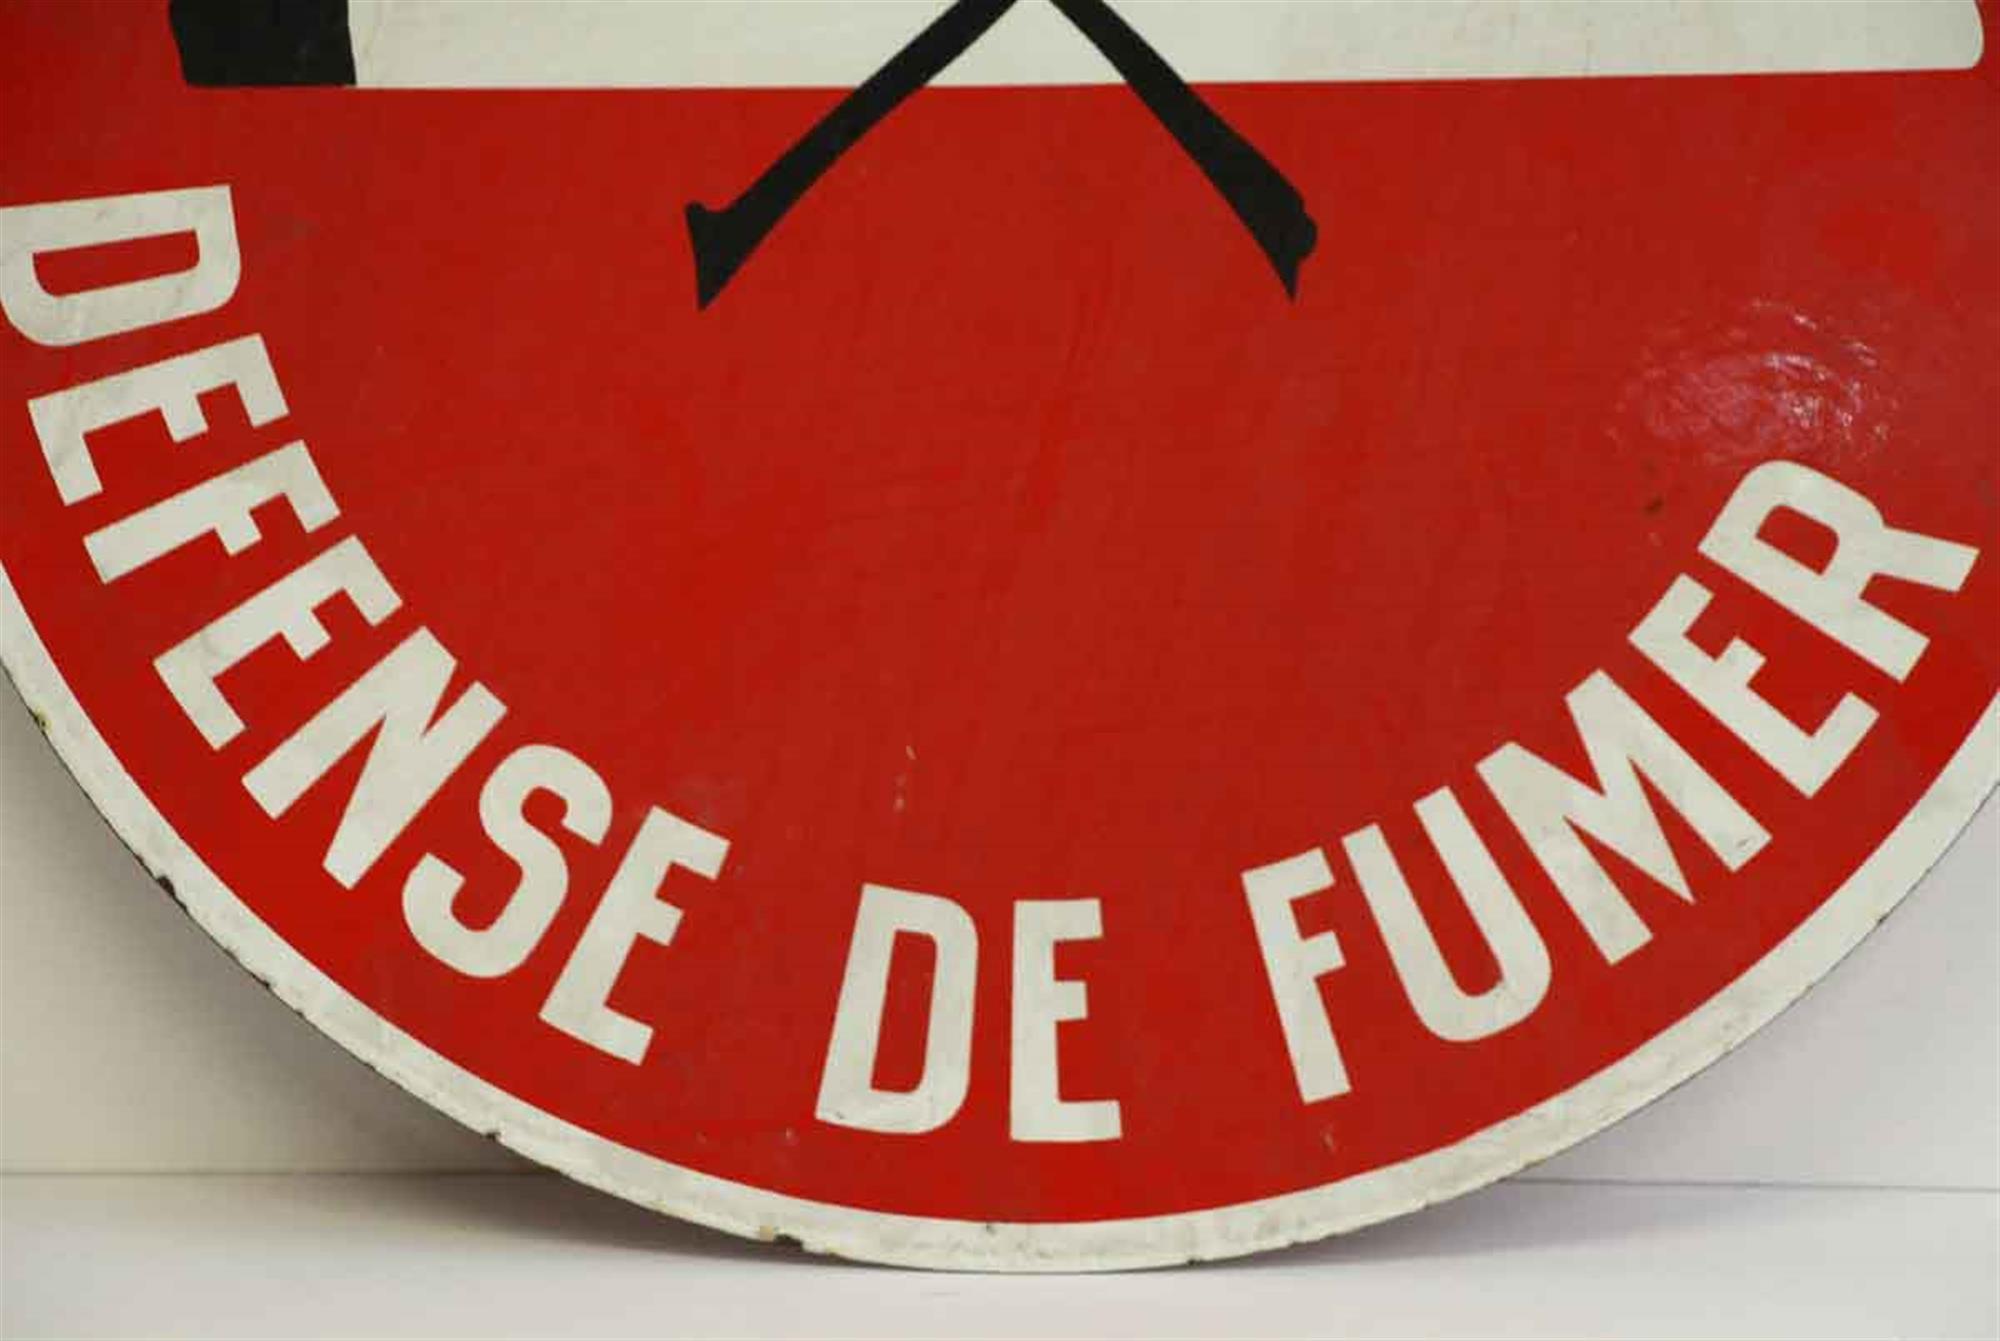 1970s round red Defense de Fumer no smoking double sided French sign with white lettering. This can be seen at our 400 Gilligan St location in Scranton, PA.